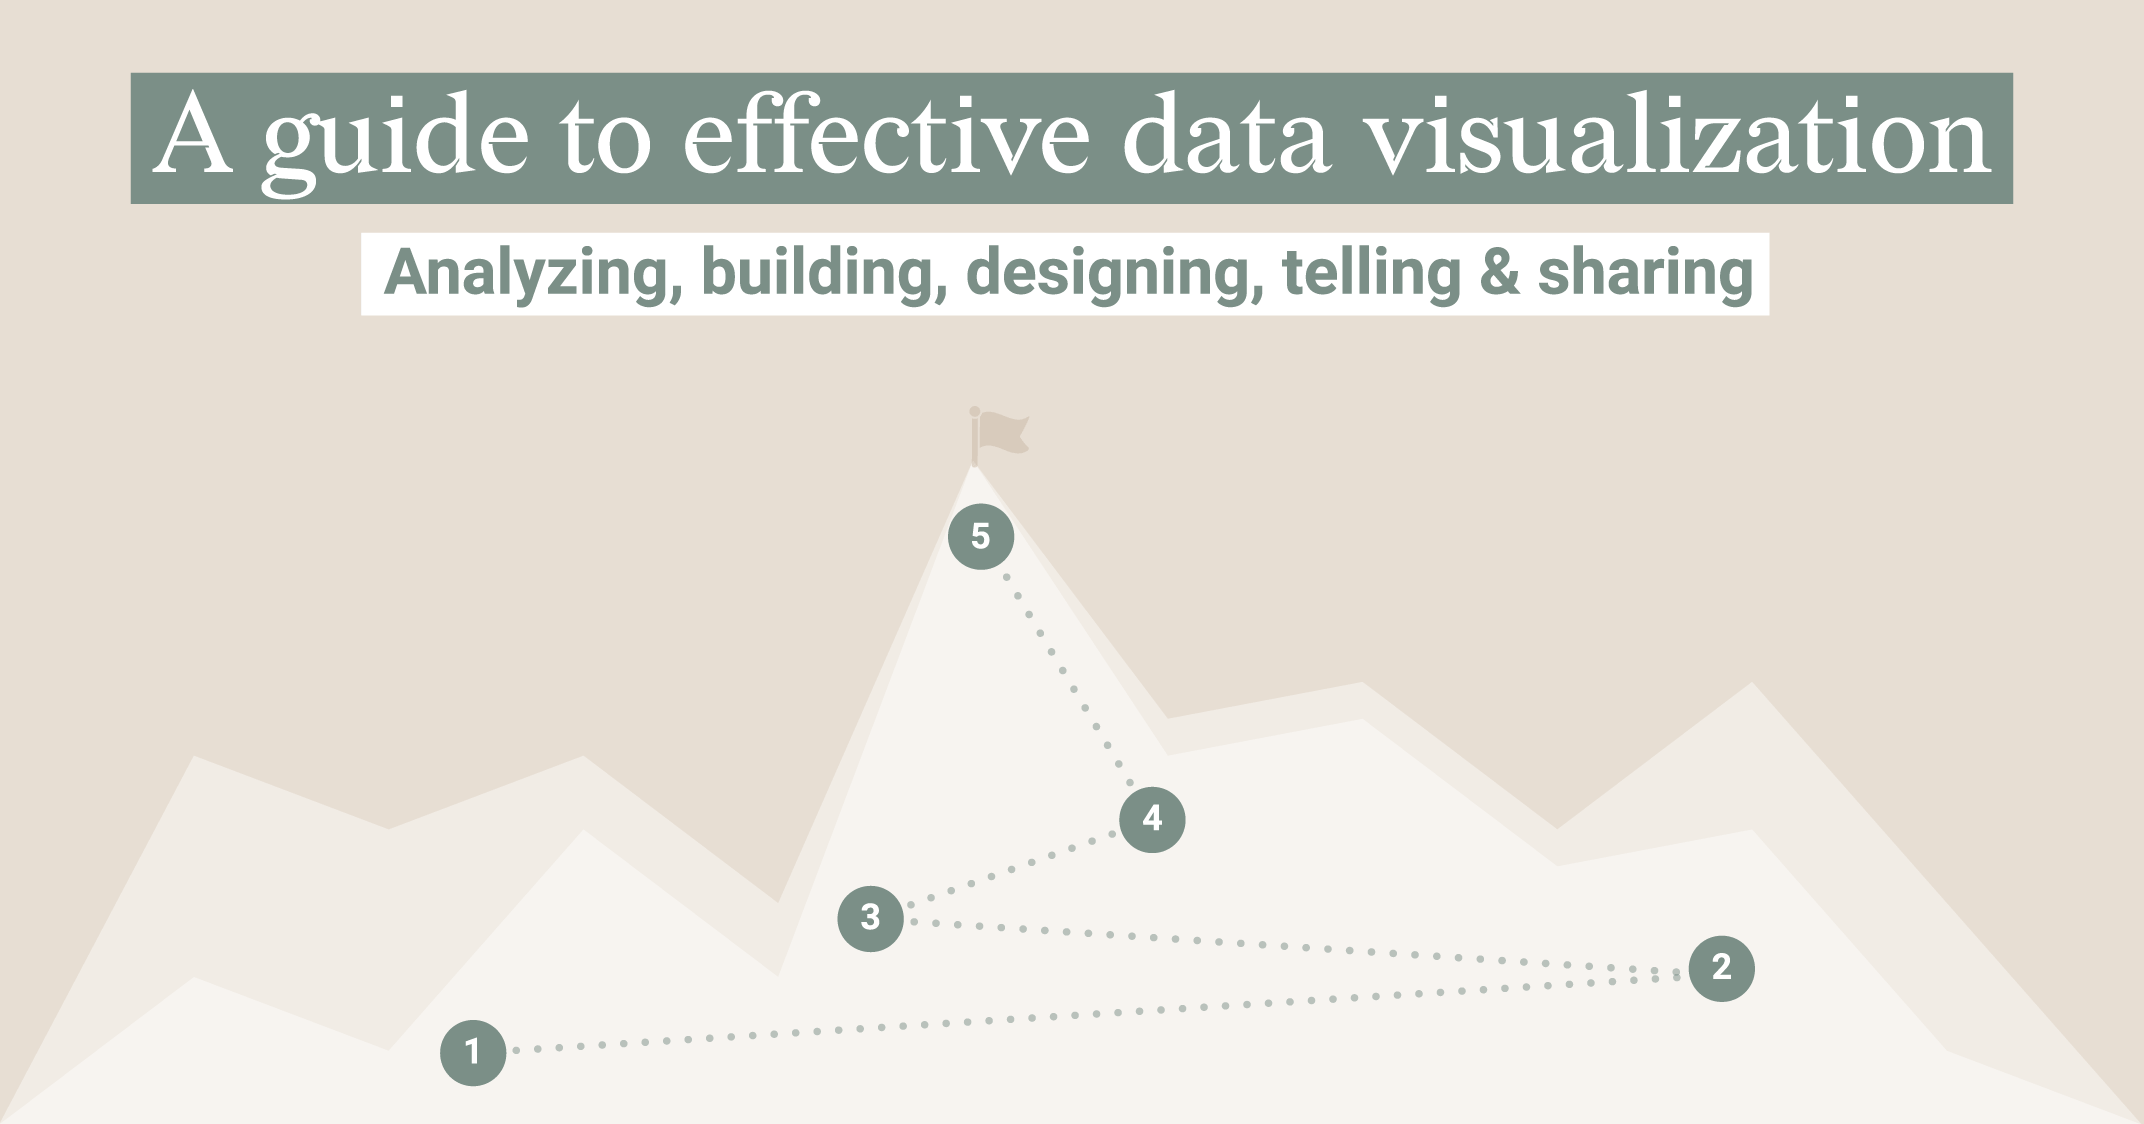 A guide to effective data visualization for data communication